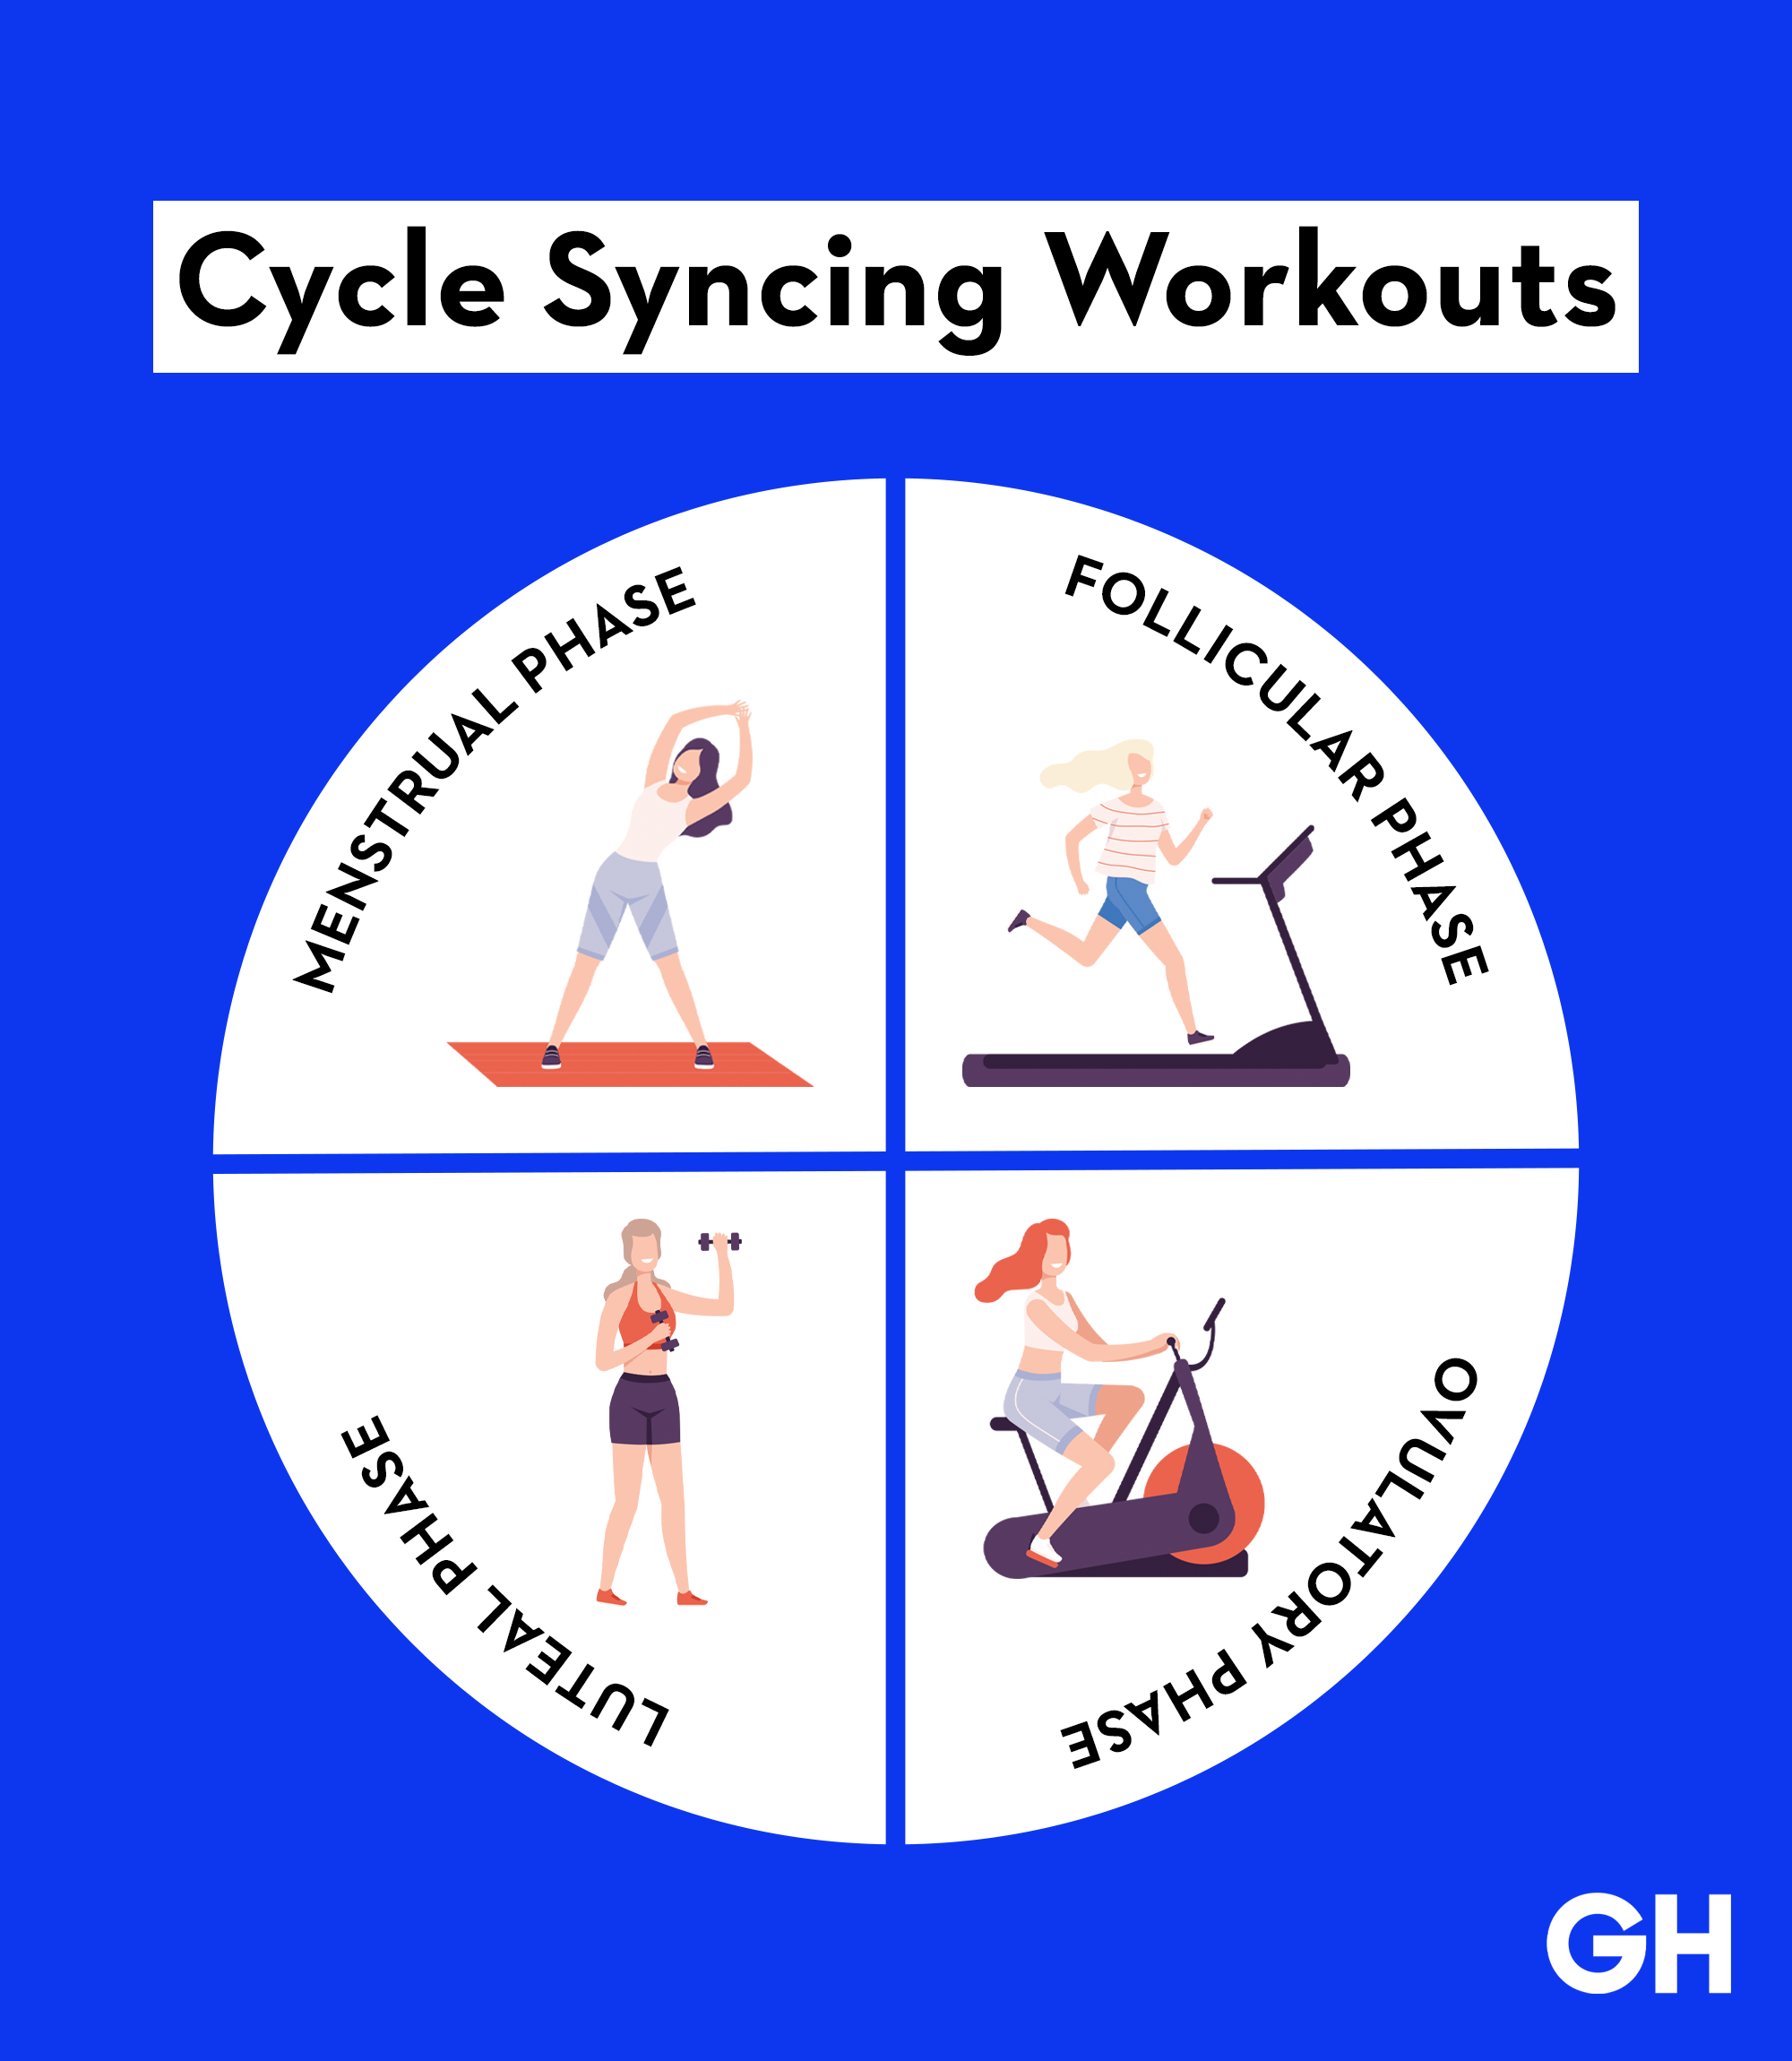 https://hips.hearstapps.com/hmg-prod/images/gh-cycle-syncing-workouts-65d79762562d4.png